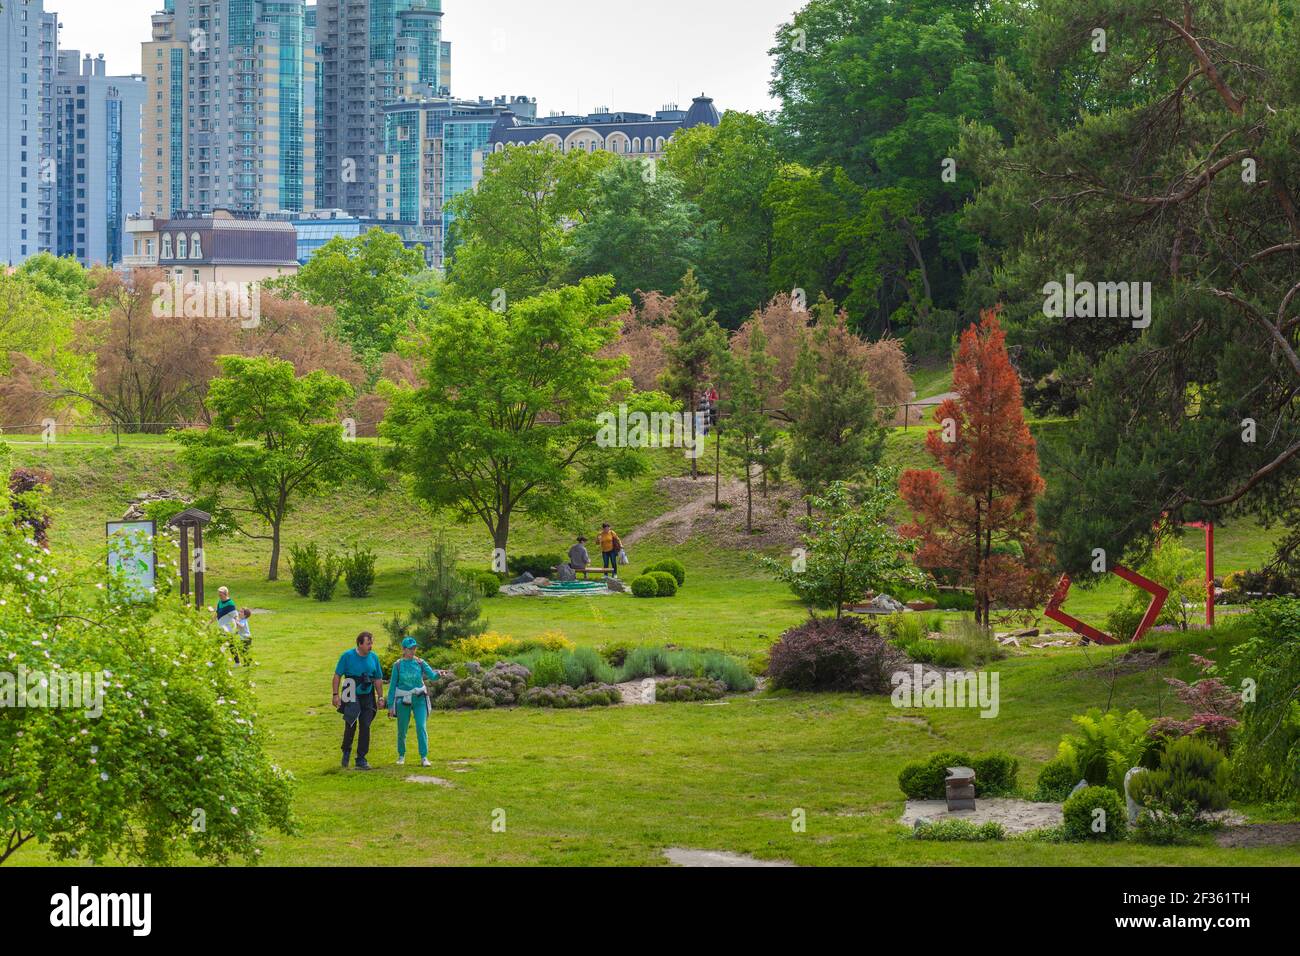 Kiev, Ukraine - June 5, 2020: Botanical Garden N.N. Grishko Kiev. People walk in the park on a clear summer day. In the background are multi-story urban buildings. High quality photo Stock Photo